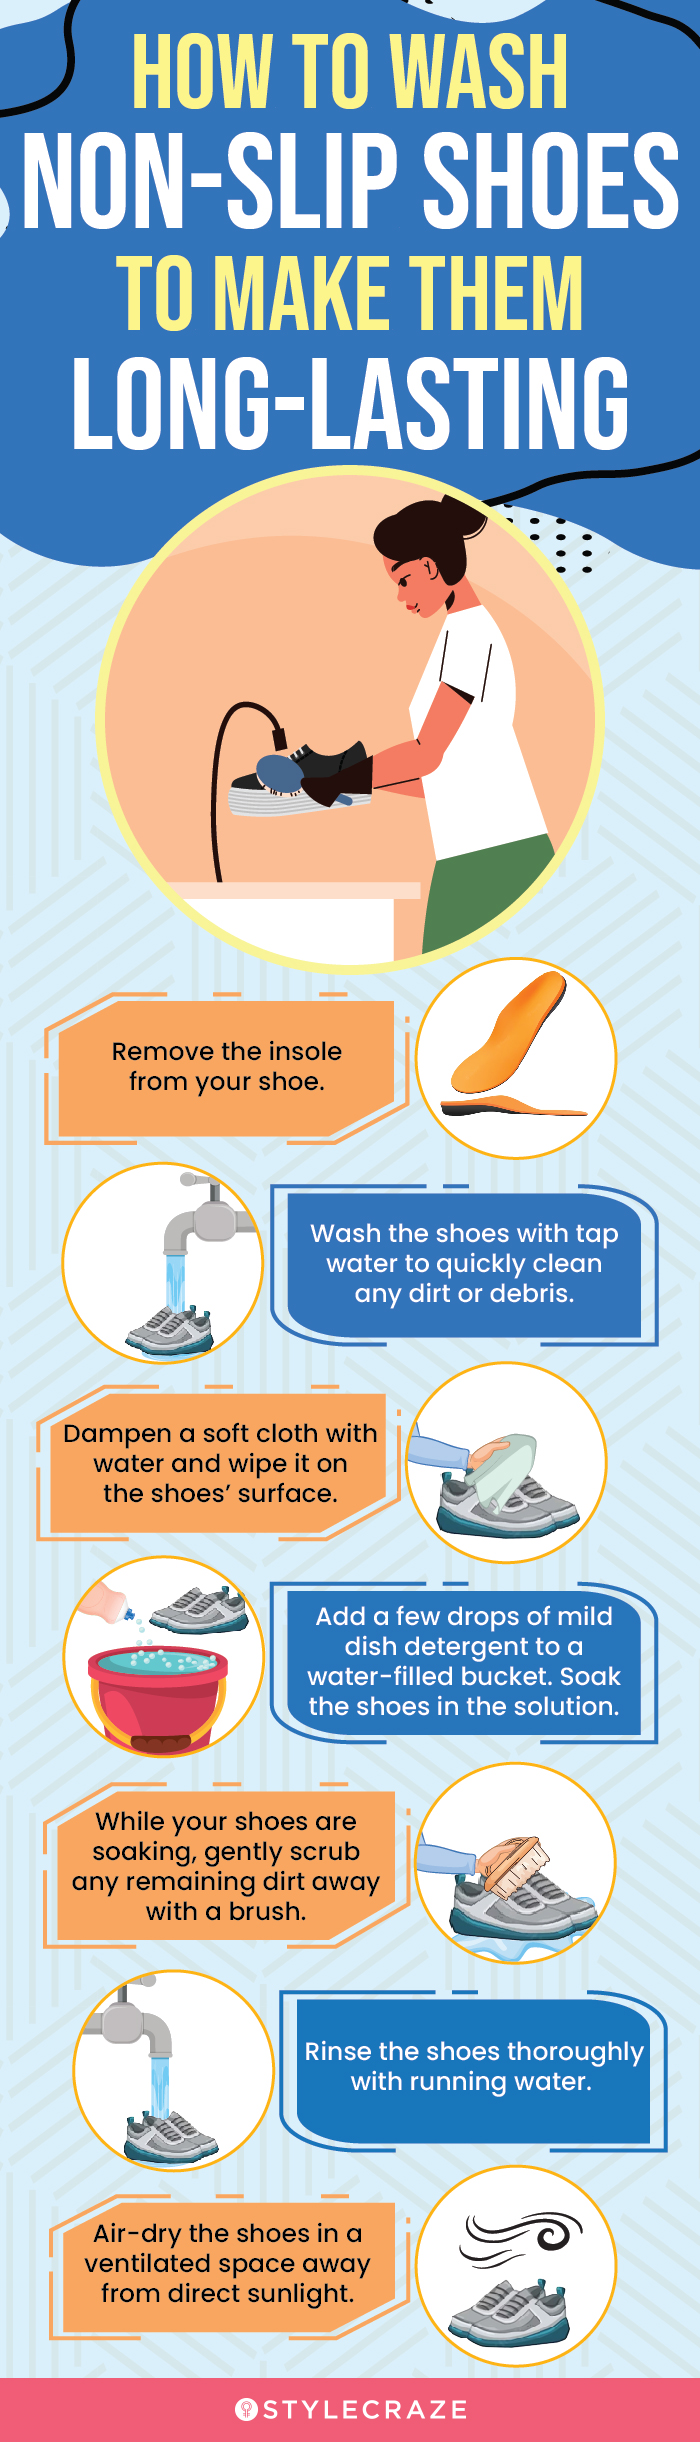 How To Wash Non-Slip Shoes To Make Them Long-Lasting